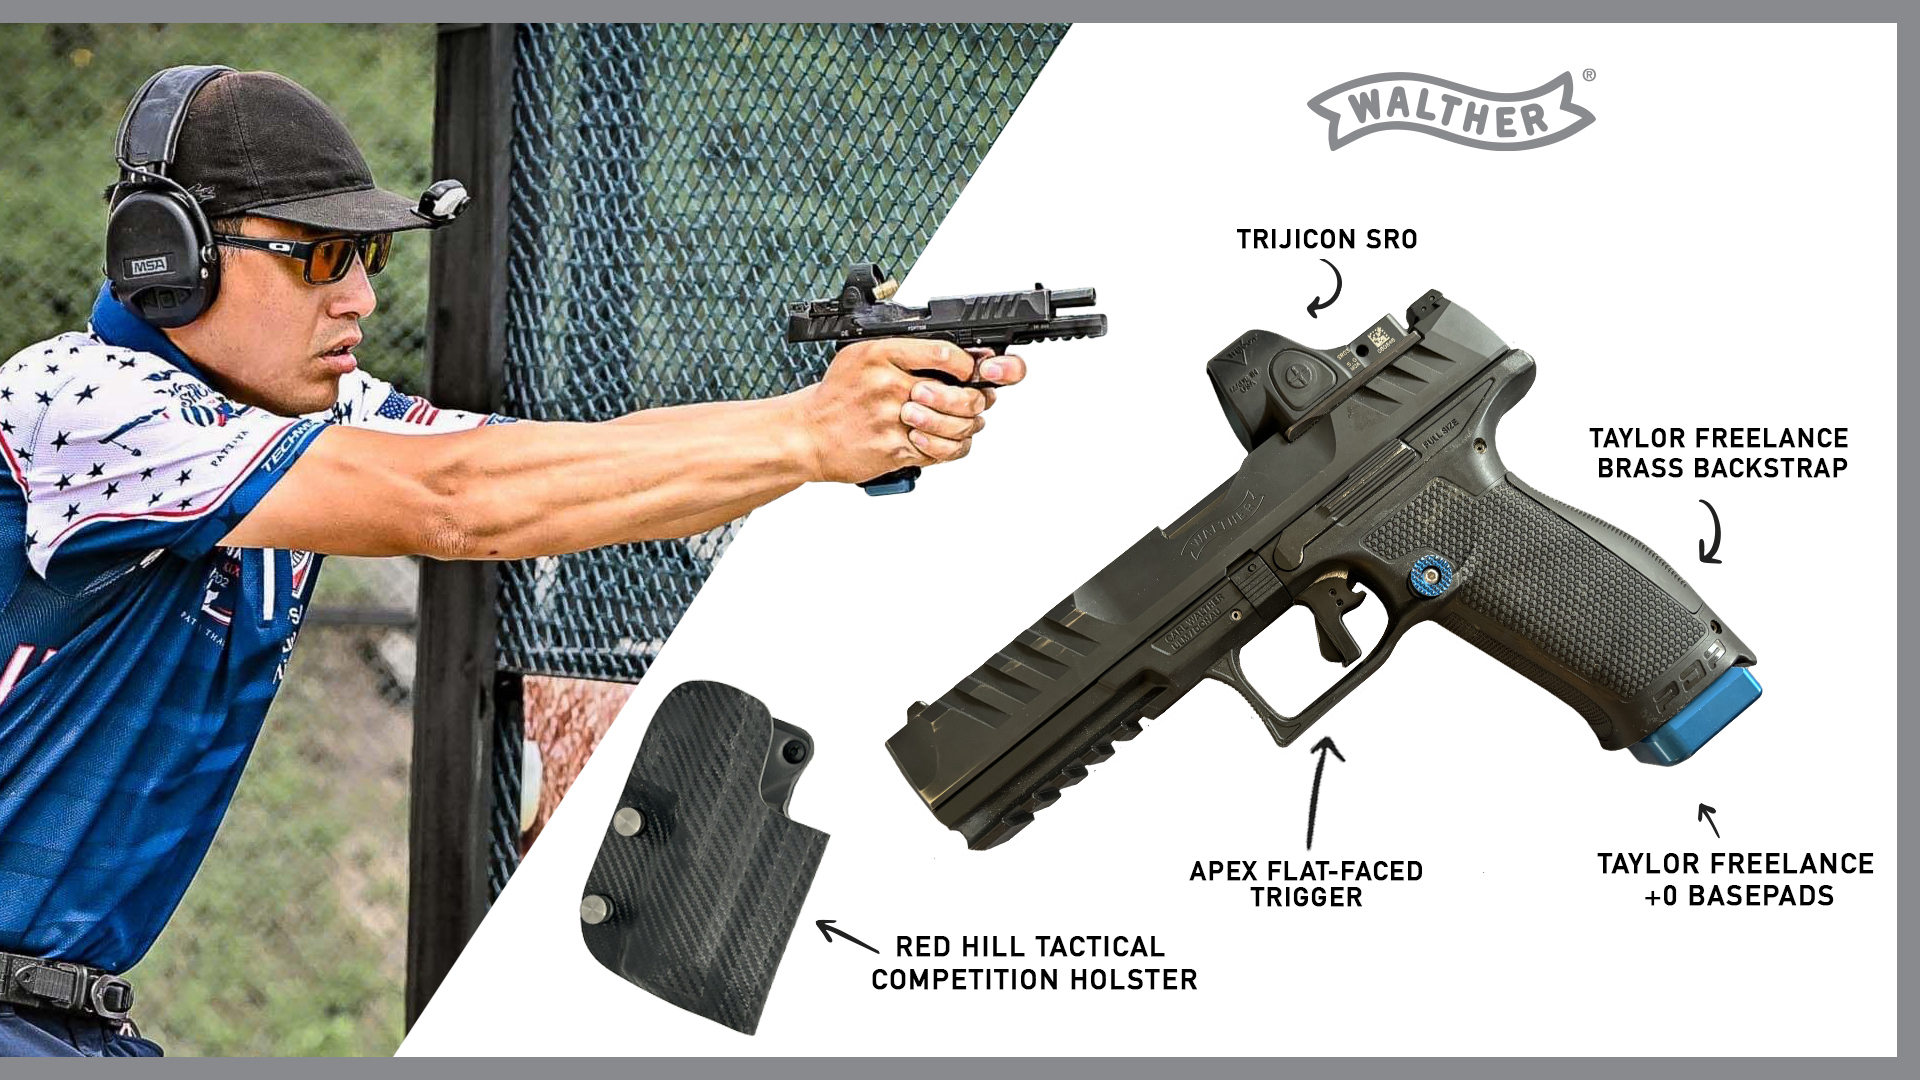 Walther's New Gun Build Giveaway: Luke Cao Edition